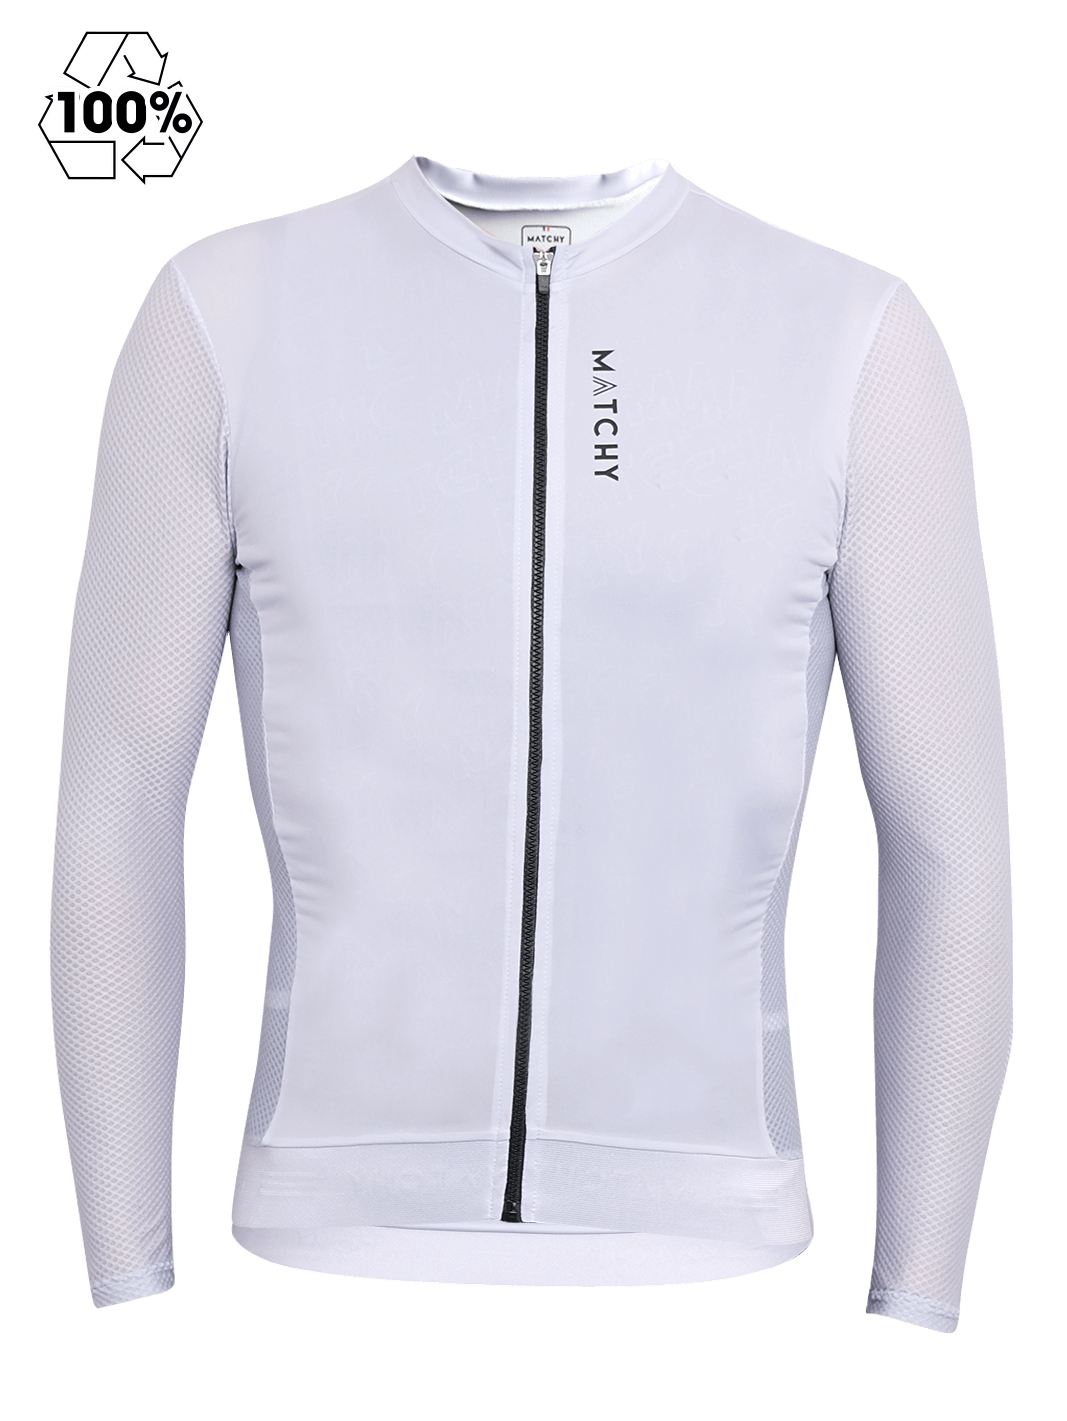 Maillot Altitude Manches Longues - Perle